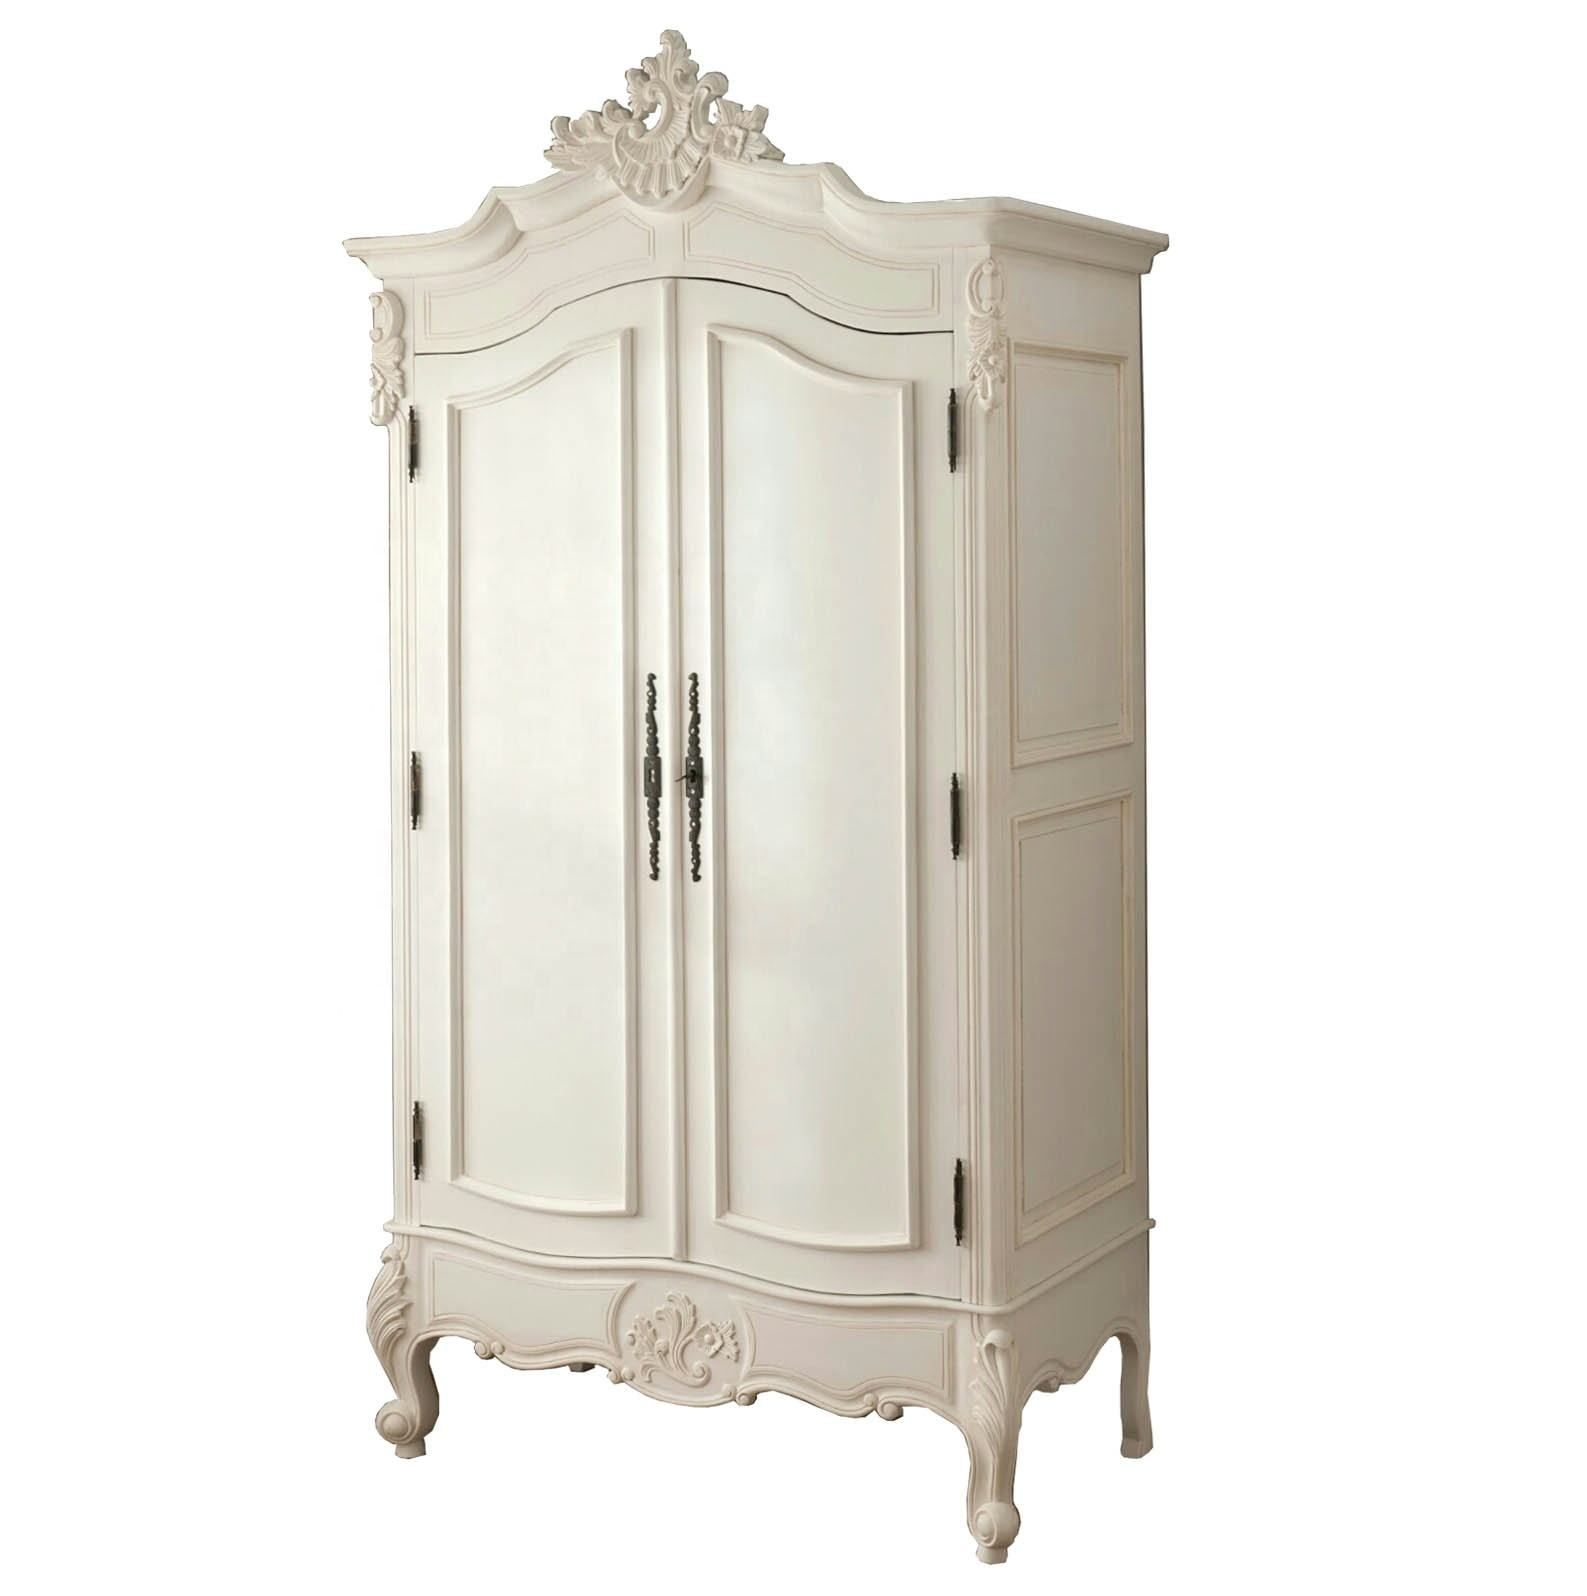 Source Antique White Painted French Style Armoire Wooden Wardrobes 2 Doors  On M.alibaba With Regard To French Style White Wardrobes (Photo 13 of 15)